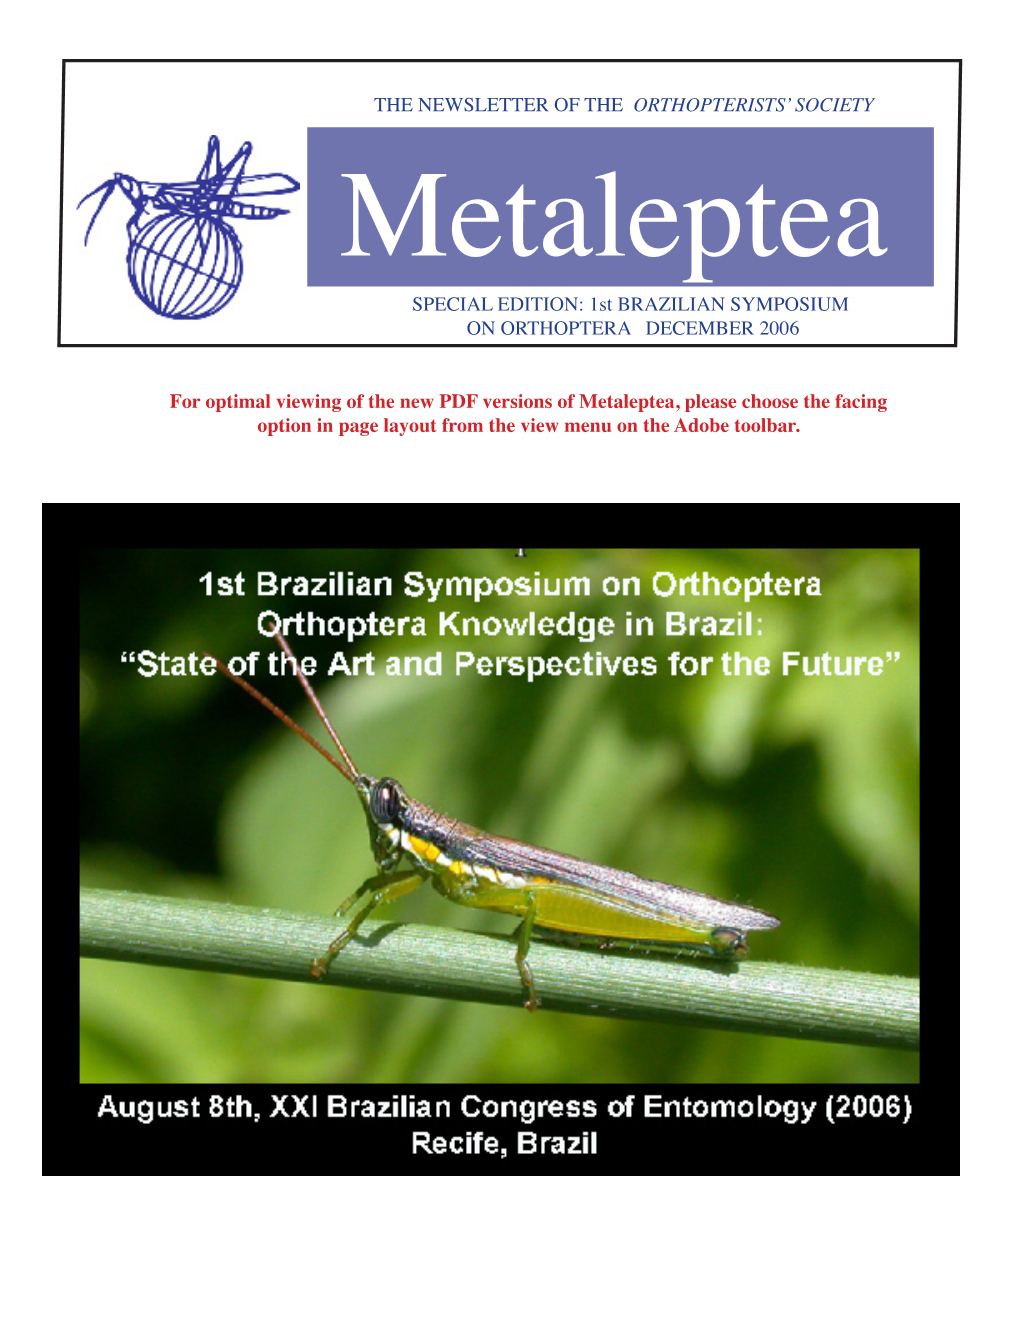 Metaleptea SPECIAL EDITION: 1St BRAZILIAN SYMPOSIUM on ORTHOPTERA DECEMBER 2006